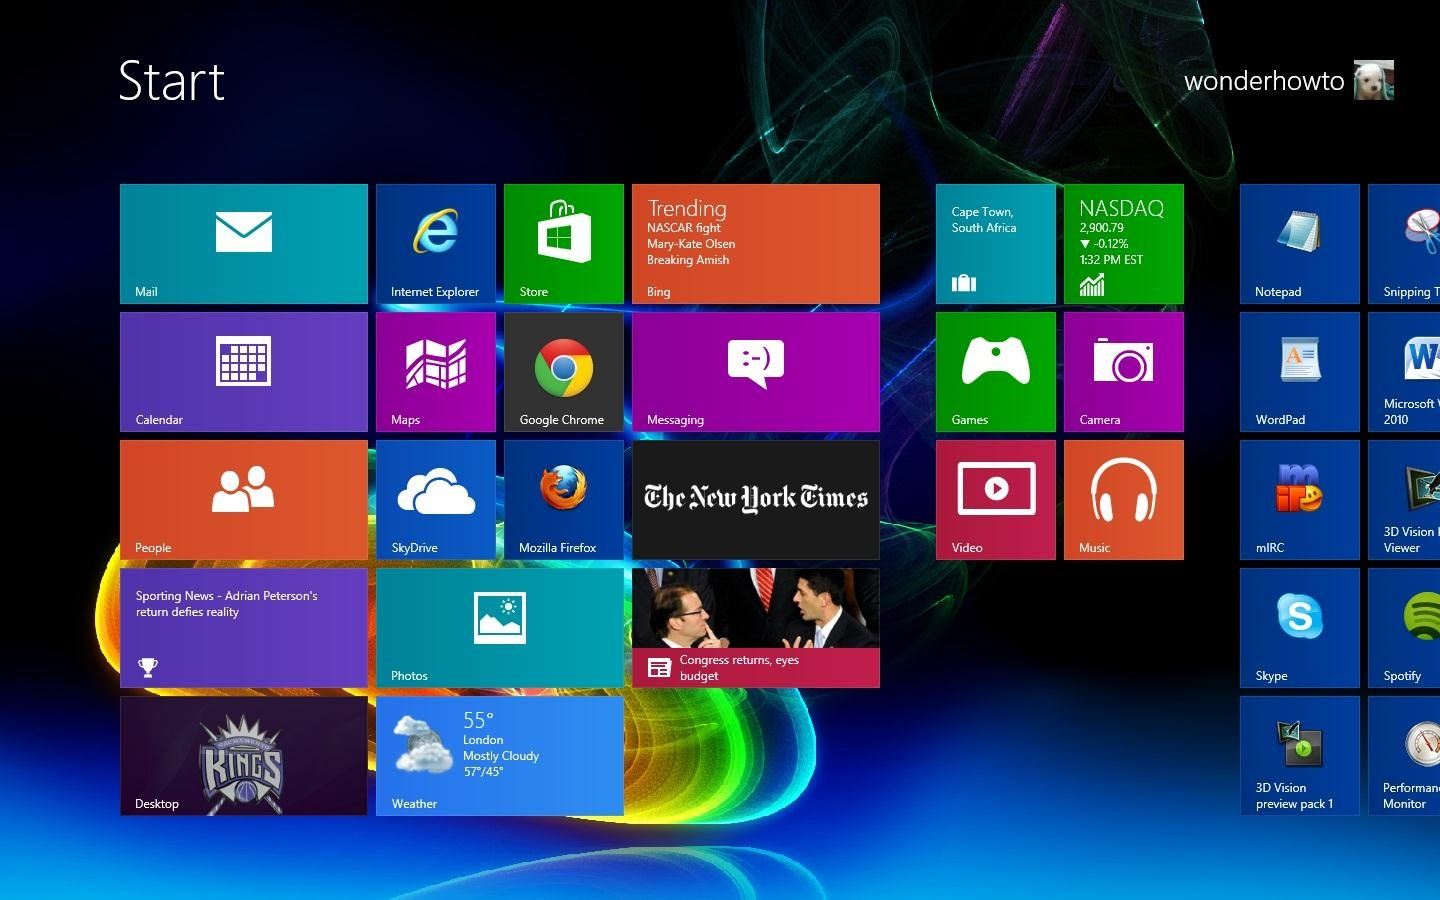 How to Add a Custom Background Image to Your Windows 8 Start Screen